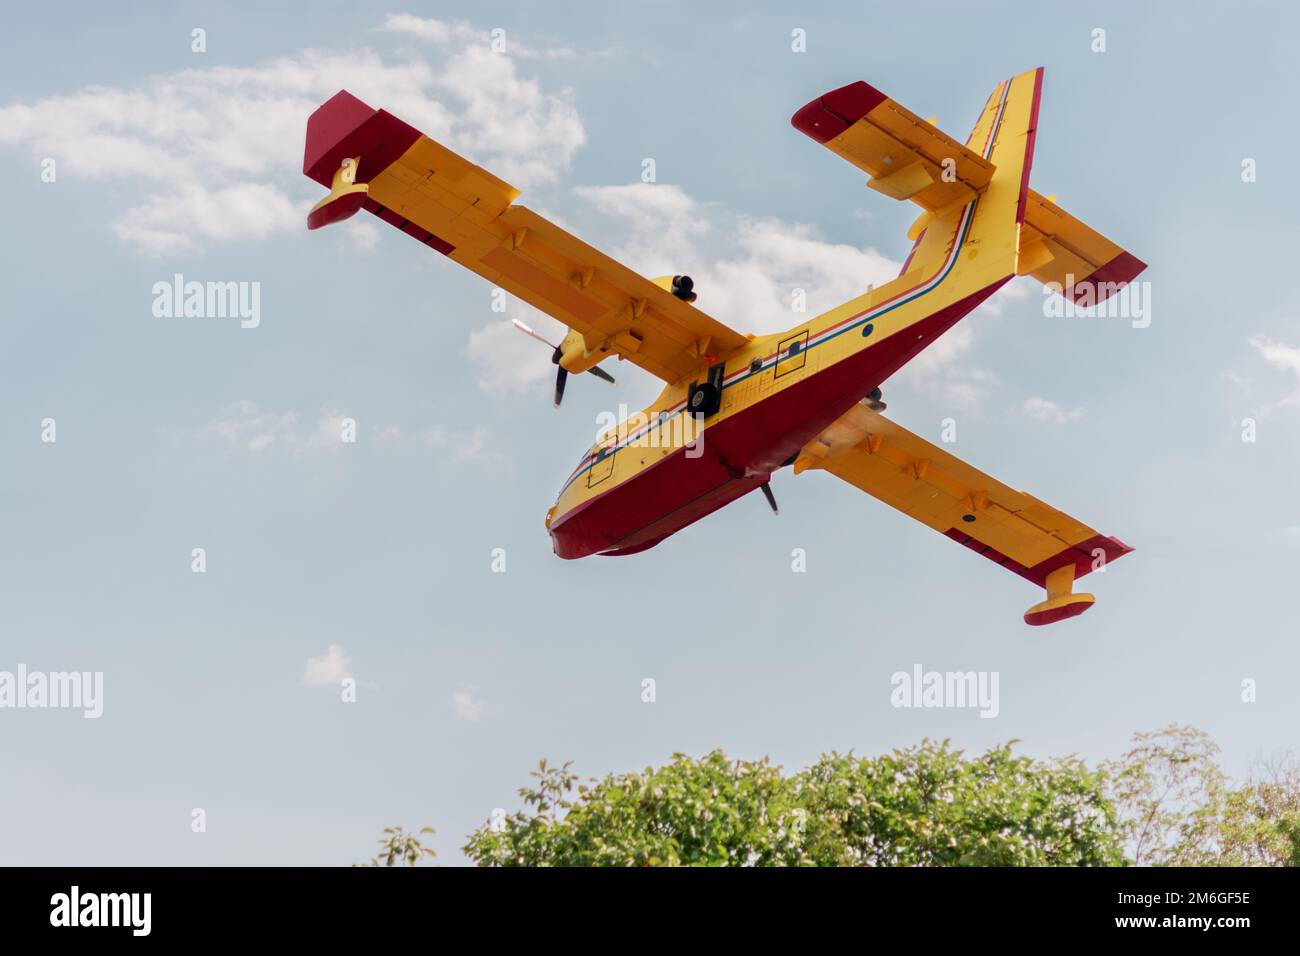 Firefighter airplane flying low in the village Stock Photo